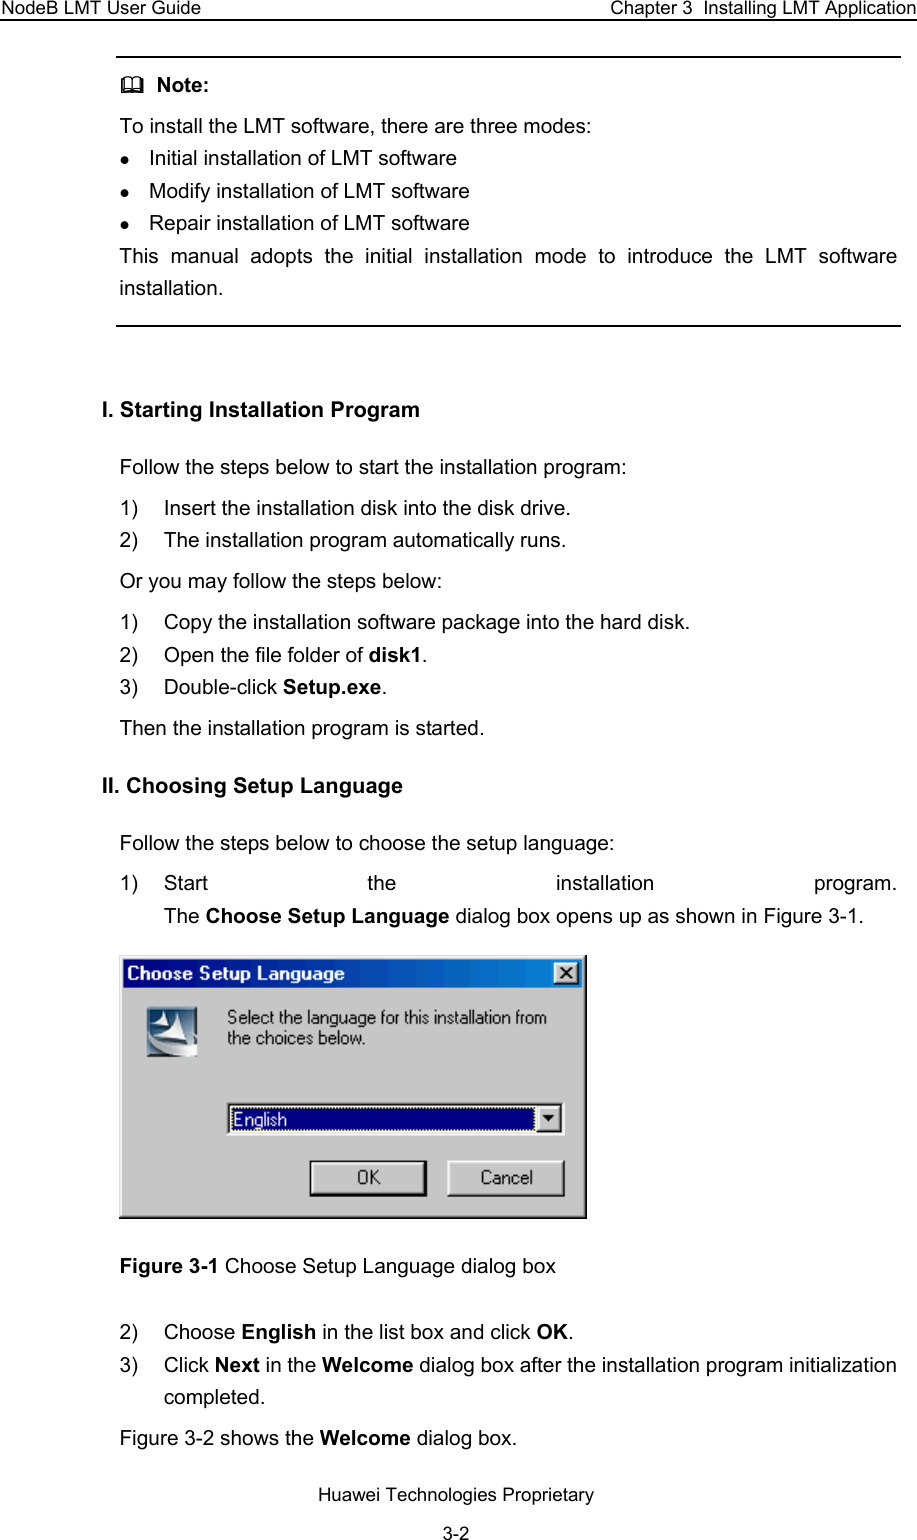 NodeB LMT User Guide  Chapter 3  Installing LMT Application   Note:  To install the LMT software, there are three modes:  z Initial installation of LMT software z Modify installation of LMT software z Repair installation of LMT software This manual adopts the initial installation mode to introduce the LMT software installation.   I. Starting Installation Program Follow the steps below to start the installation program: 1)  Insert the installation disk into the disk drive. 2)  The installation program automatically runs. Or you may follow the steps below: 1)  Copy the installation software package into the hard disk. 2)  Open the file folder of disk1. 3) Double-click Setup.exe. Then the installation program is started.  II. Choosing Setup Language  Follow the steps below to choose the setup language: 1) Start the installation program.  The Choose Setup Language dialog box opens up as shown in Figure 3-1.   Figure 3-1 Choose Setup Language dialog box  2) Choose English in the list box and click OK.  3) Click Next in the Welcome dialog box after the installation program initialization completed. Figure 3-2 shows the Welcome dialog box.   Huawei Technologies Proprietary 3-2 